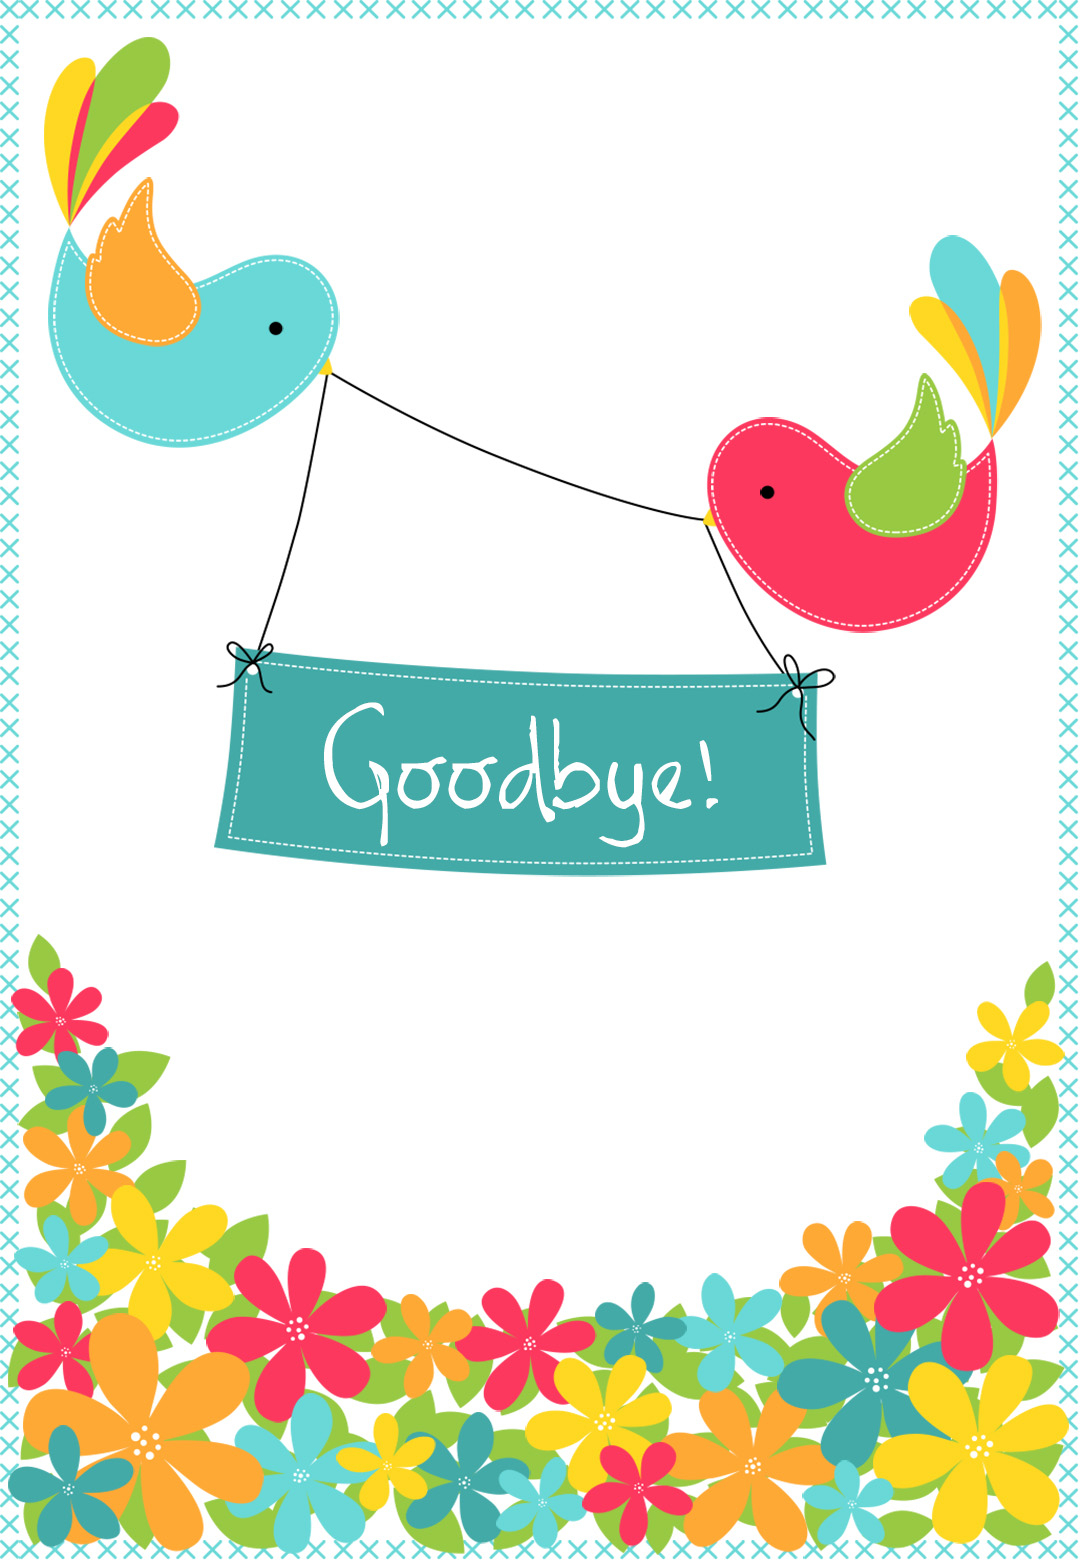 Goodbye From Your Colleagues – Good Luck Card (Free Pertaining To Good Luck Card Template